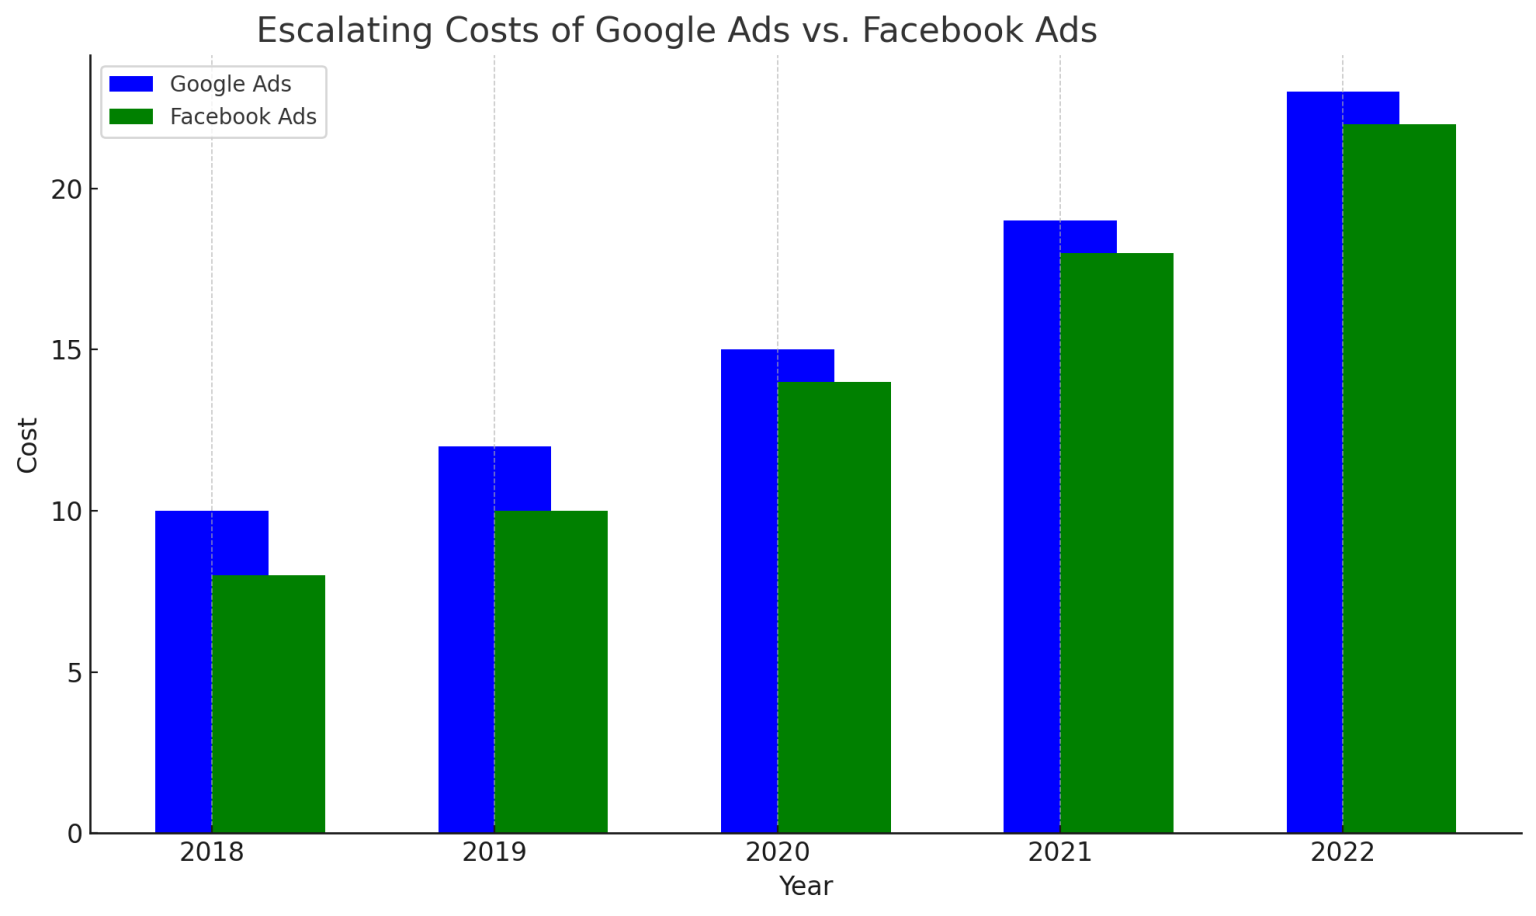 Escalating costs of advertising